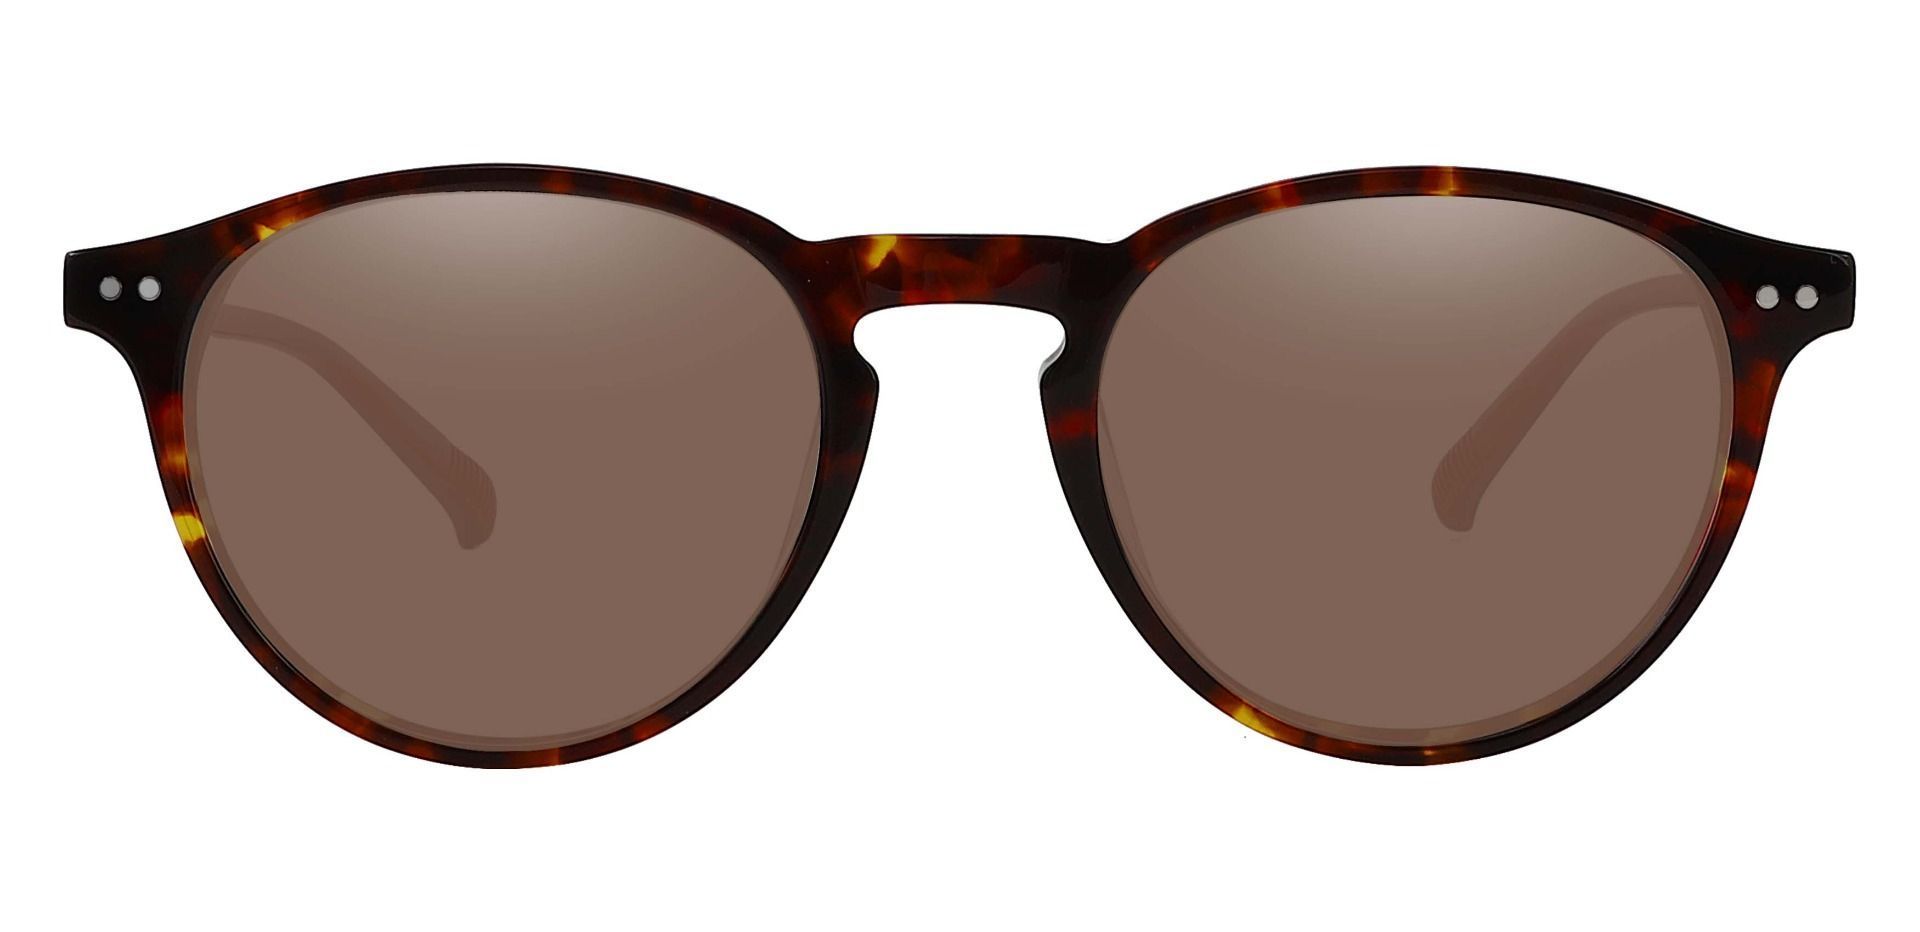 Monarch Oval Lined Bifocal Sunglasses - Tortoise Frame With Brown Lenses